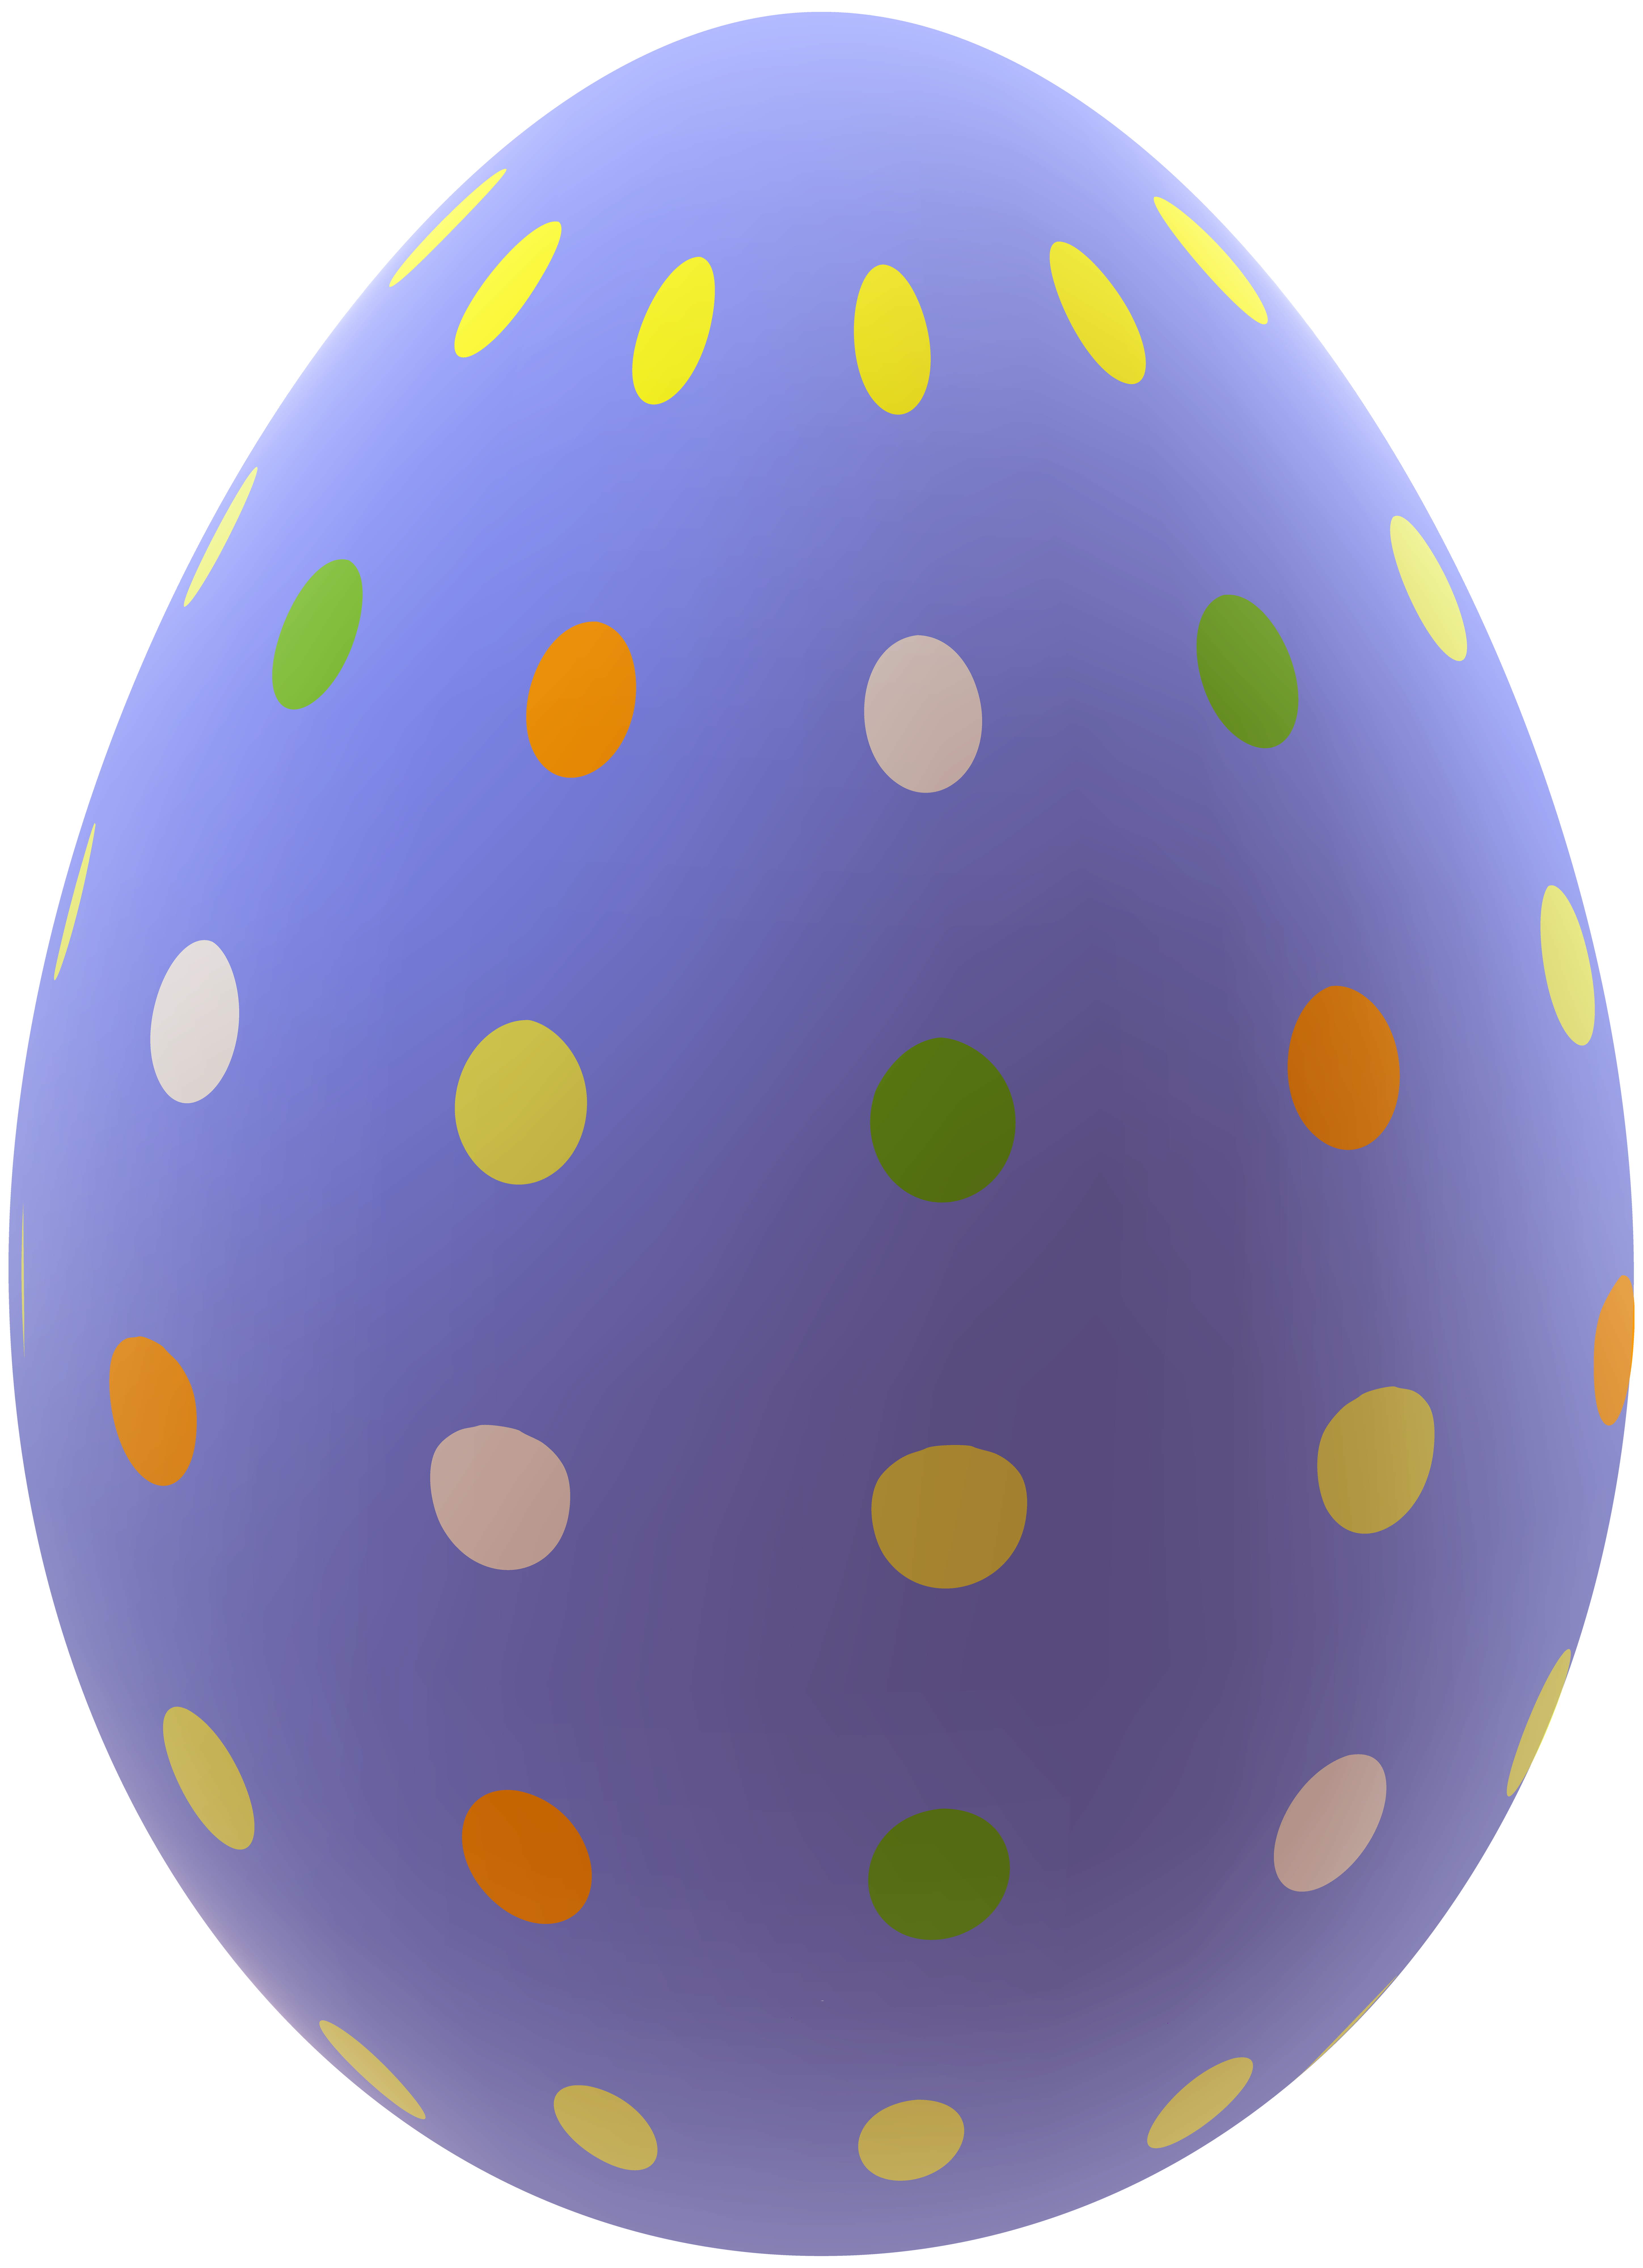 Green Easter Egg PNG Clipart​  Gallery Yopriceville - High-Quality Free  Images and Transparent PNG Clipart